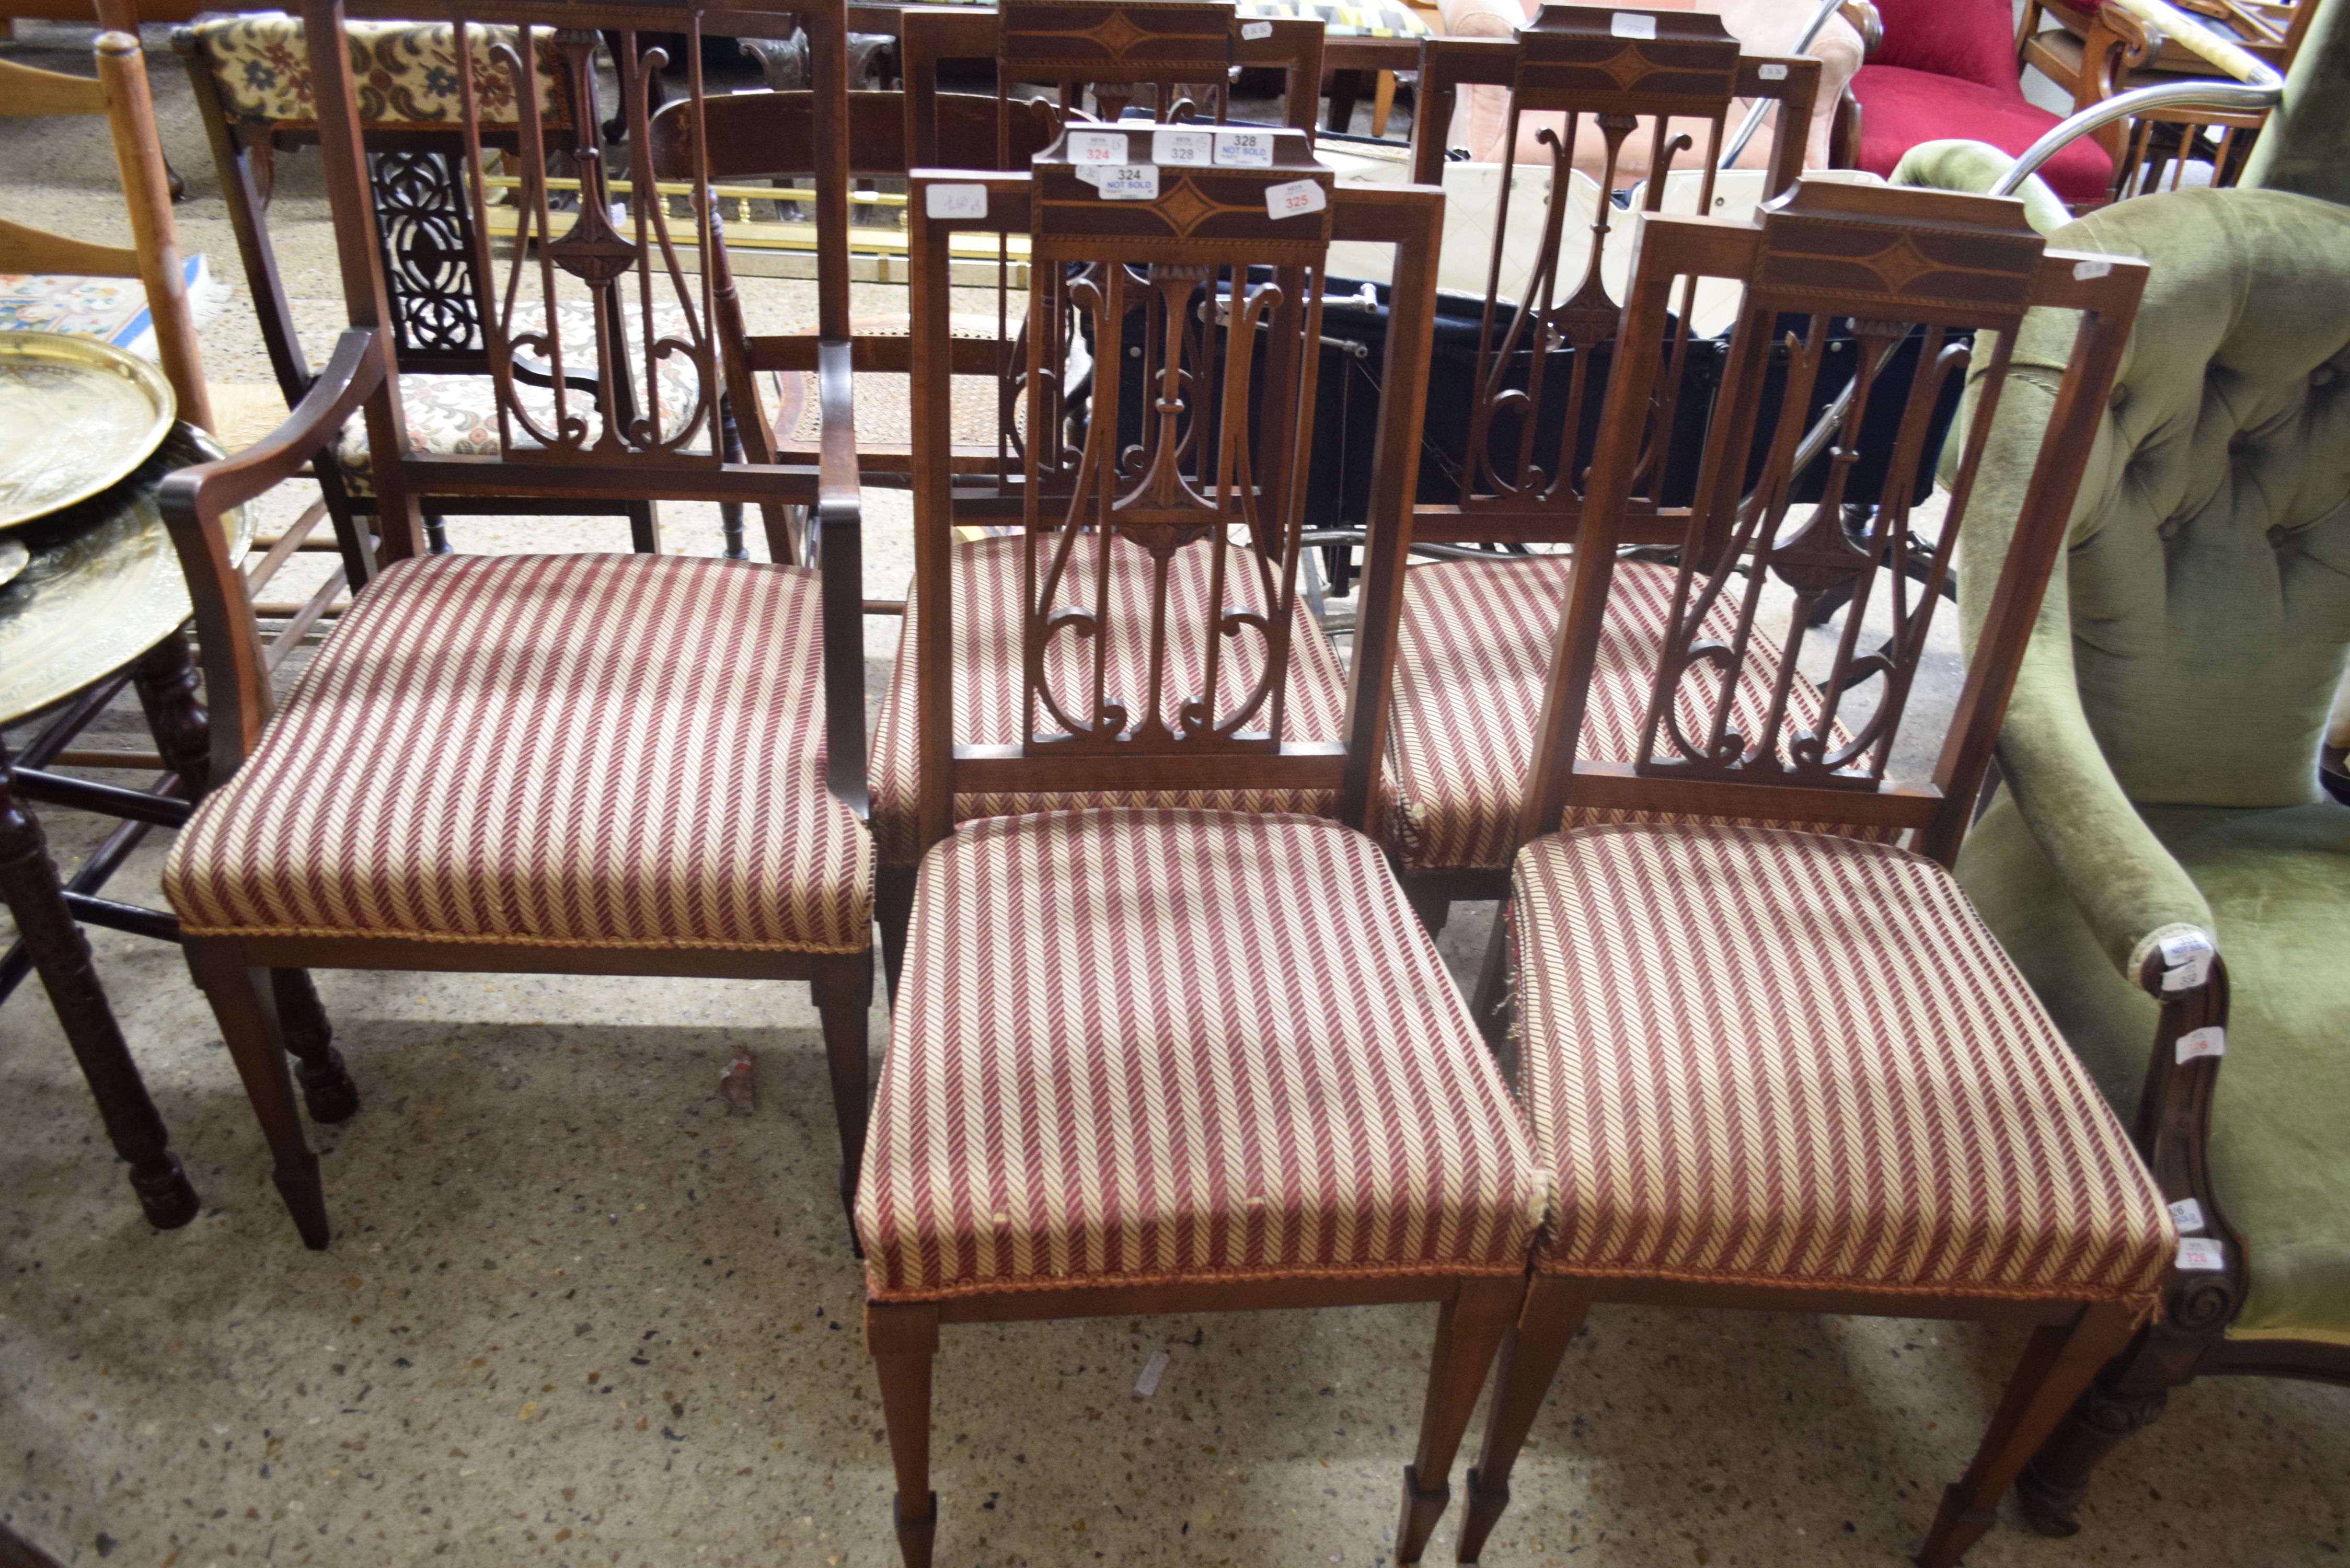 SET OF FIVE EDWARDIAN MAHOGANY DINING CHAIRS WITH STRIPED UPHOLSTERED SEATS